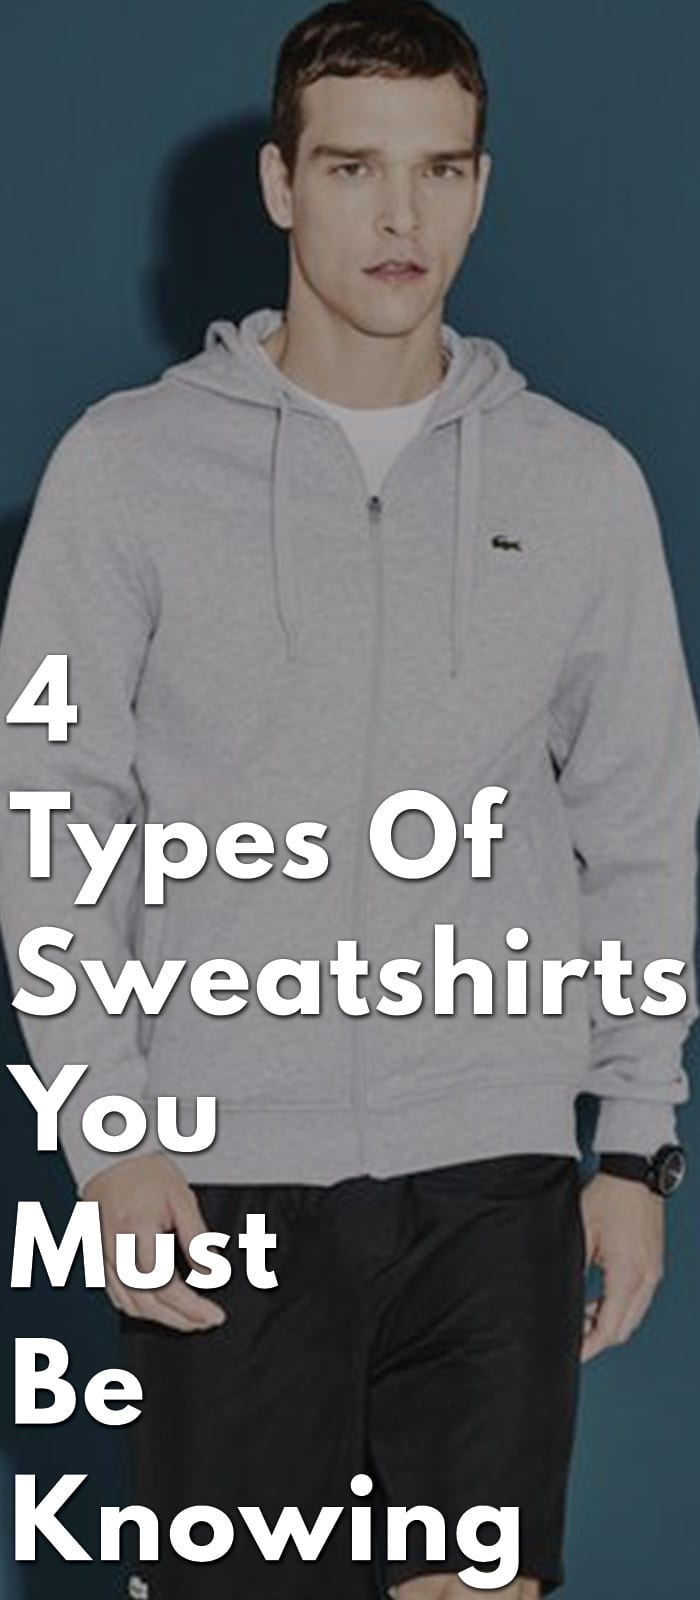 4-Types-Of-Sweatshirts-You-Must-Be-Knowing